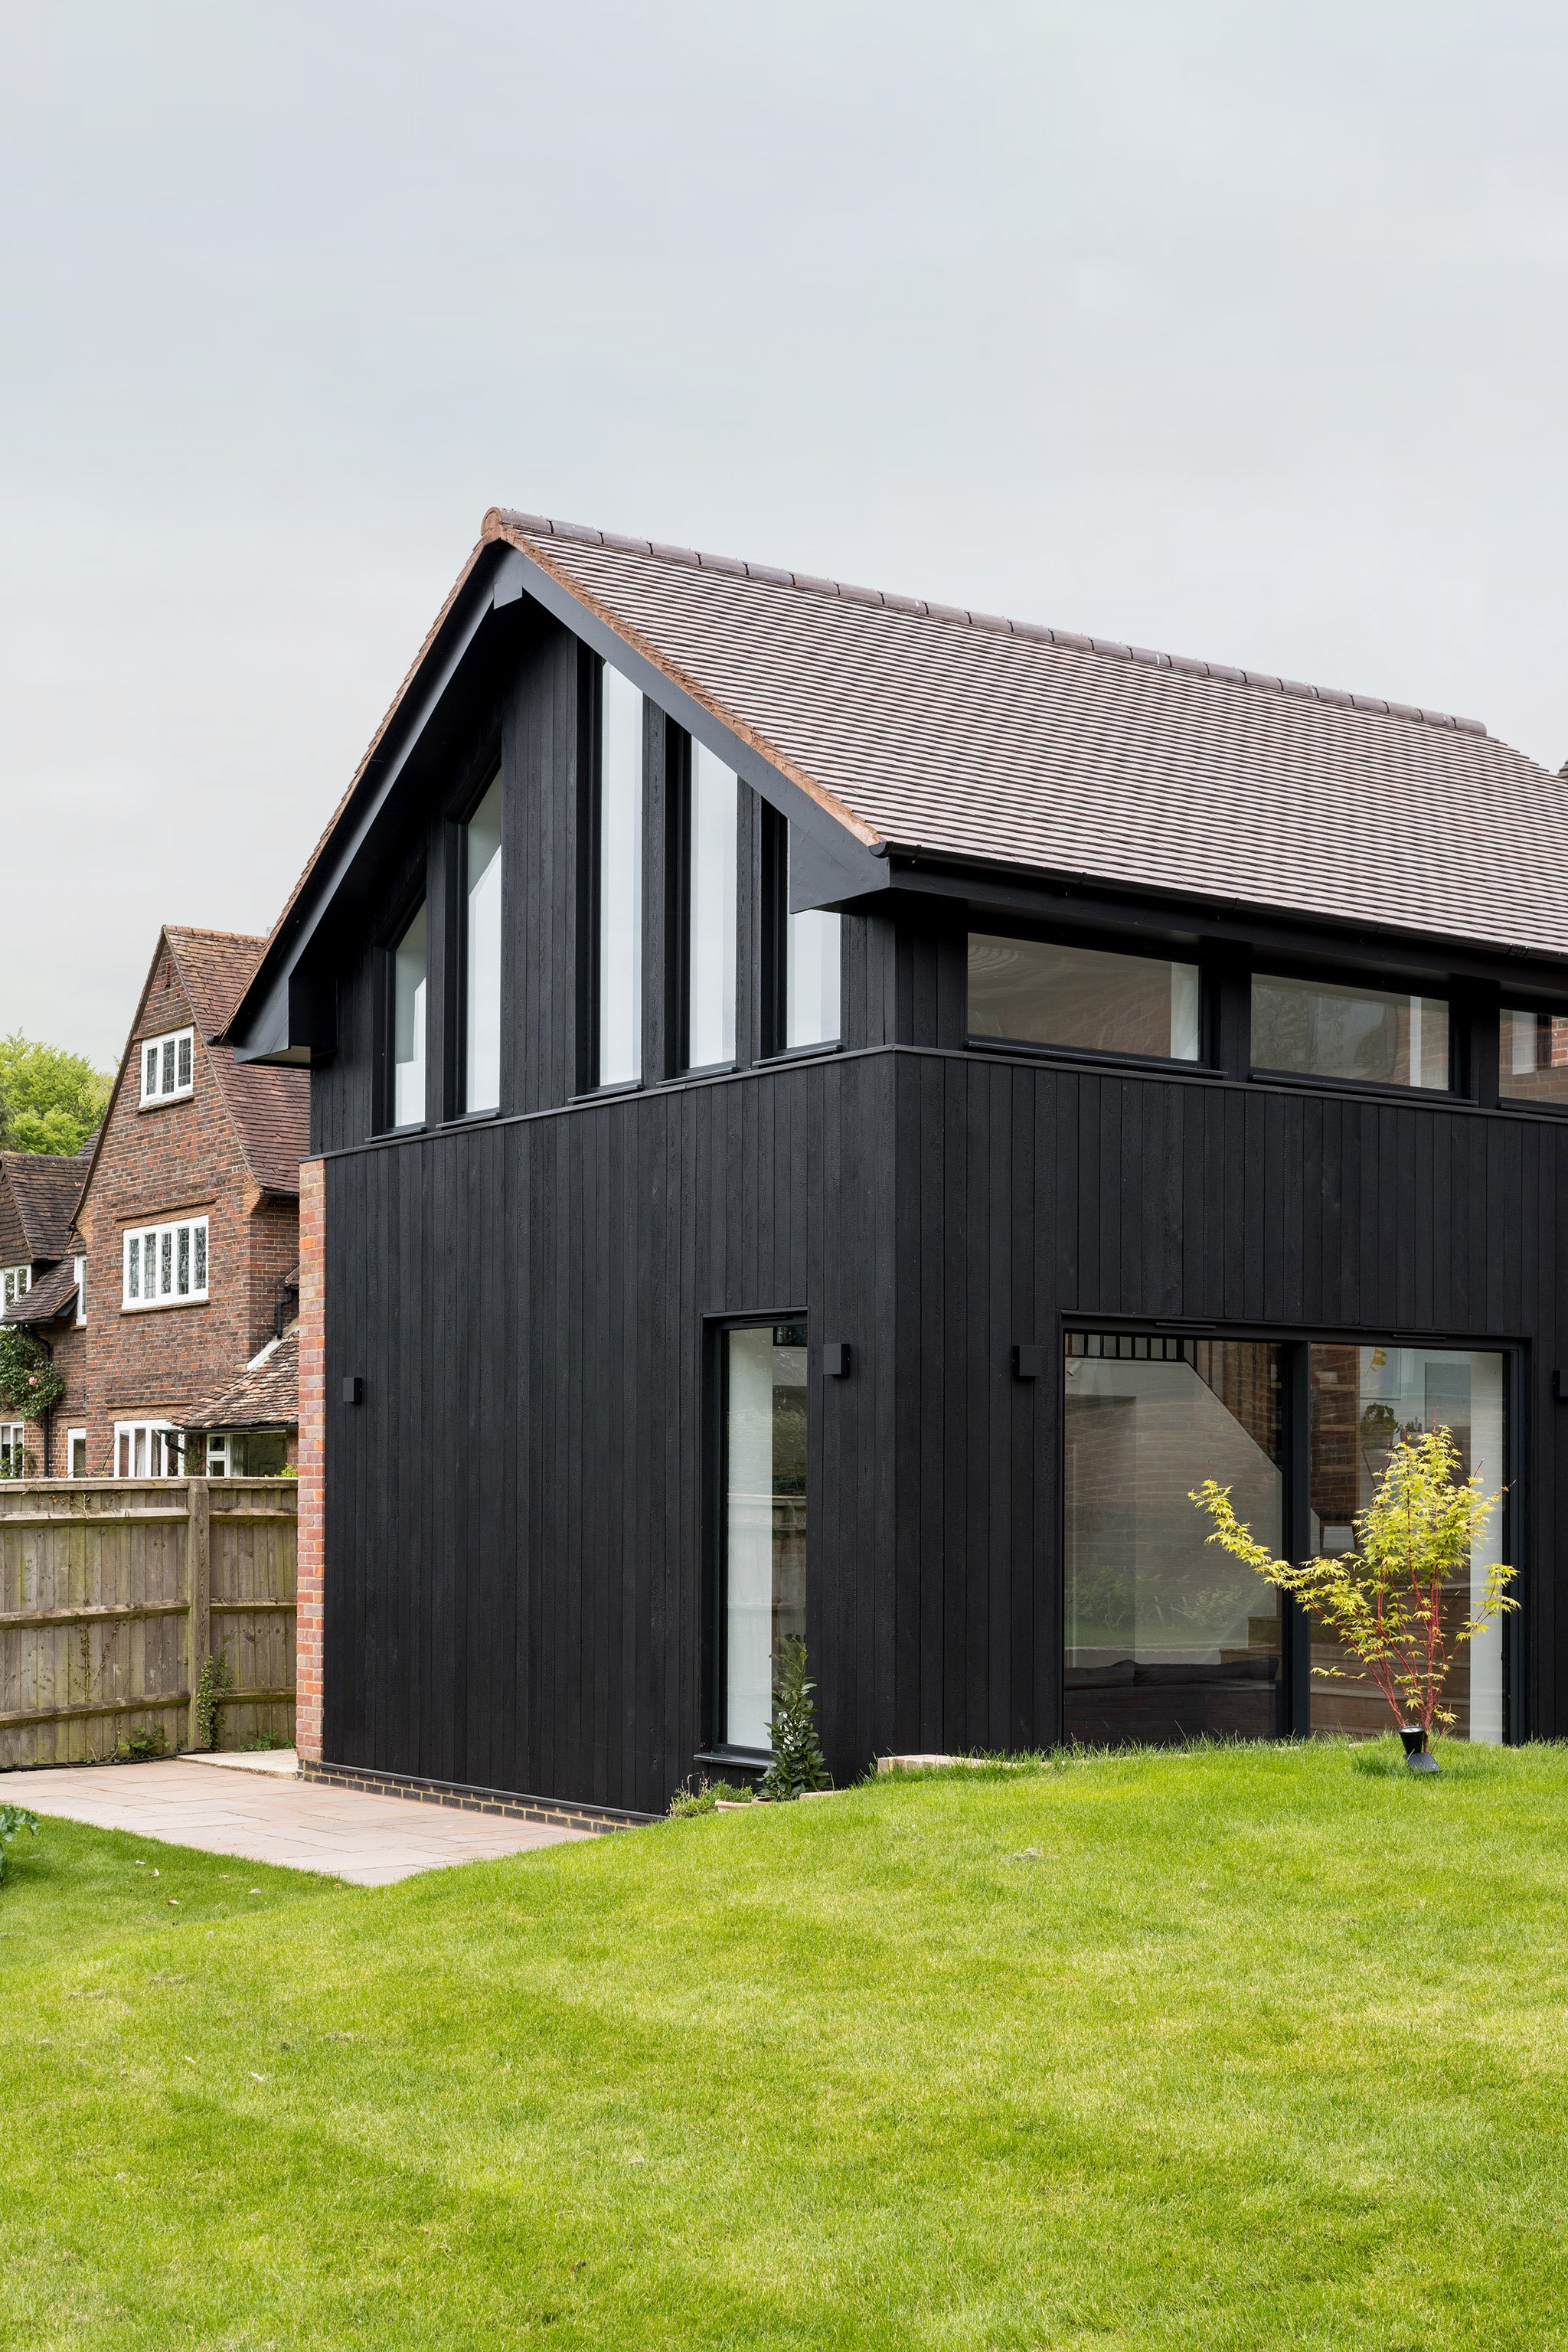 1-The-Pippins-Charred-Timber-House-Extension-Interior-Design-Architecture-London-Buckinghamshire-UK-Rider-Stirland-Architects.JPG